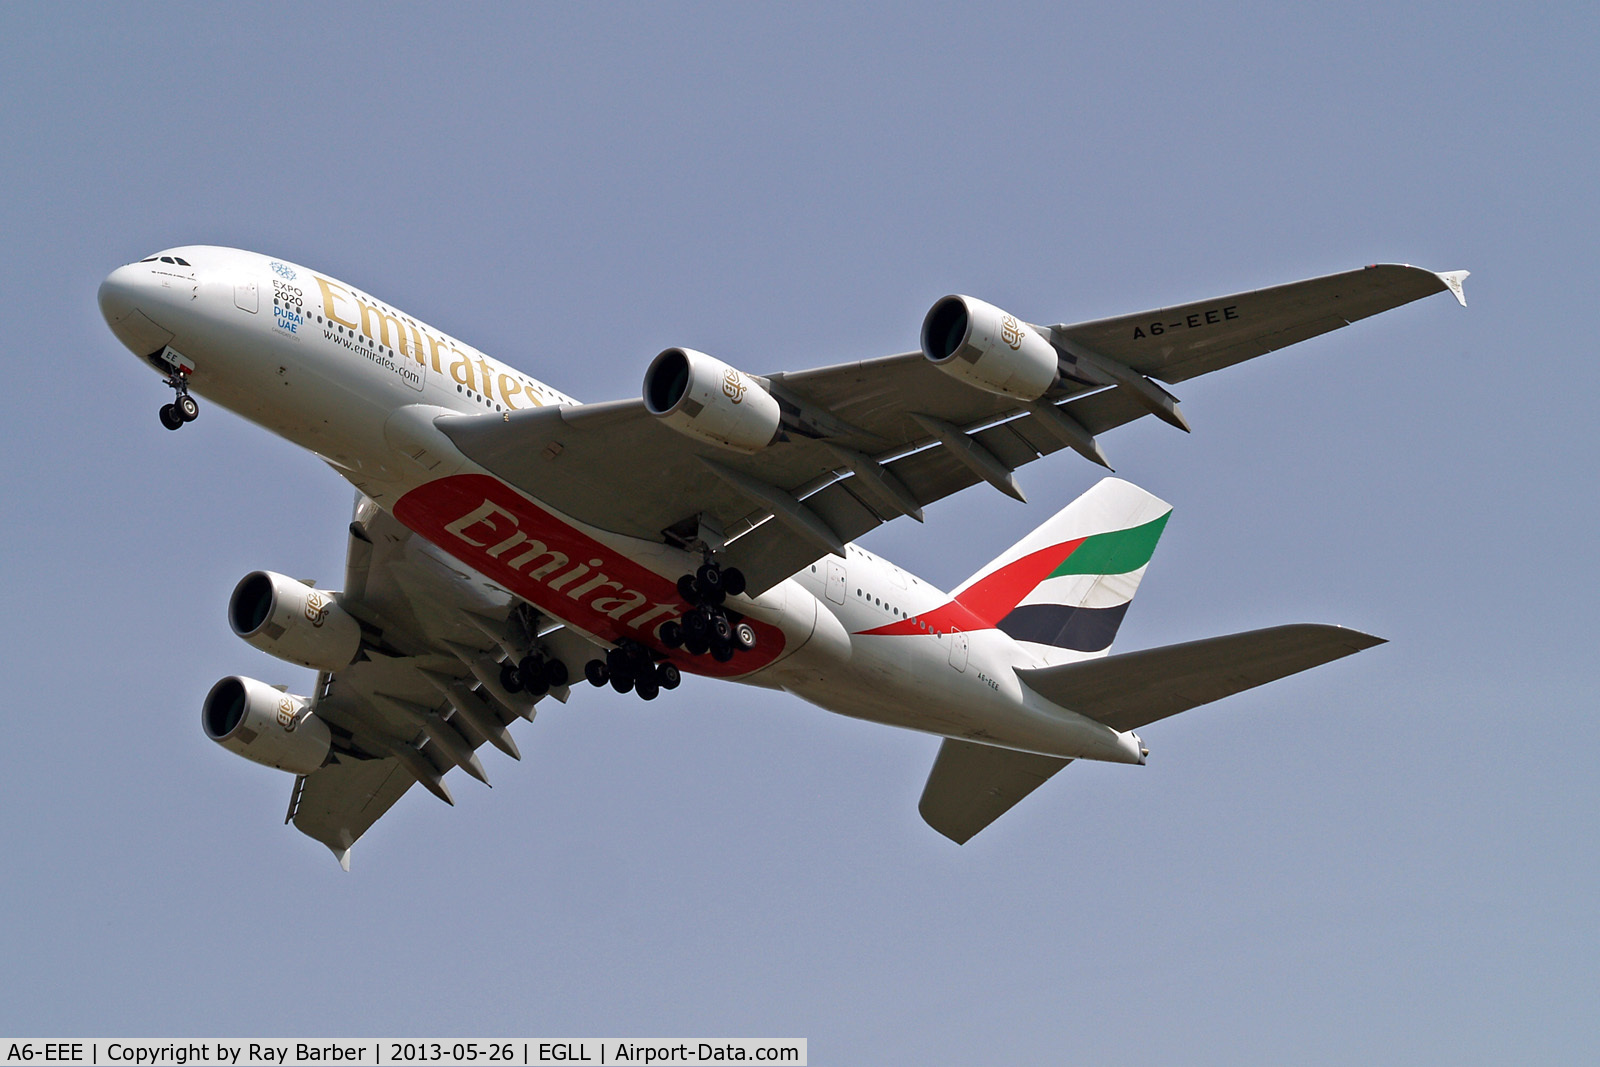 A6-EEE, 2012 Airbus A380-861 C/N 112, A6-EEE   Airbus A380-861 [112] (Emirates Airlines) Home~G 26/05/2013